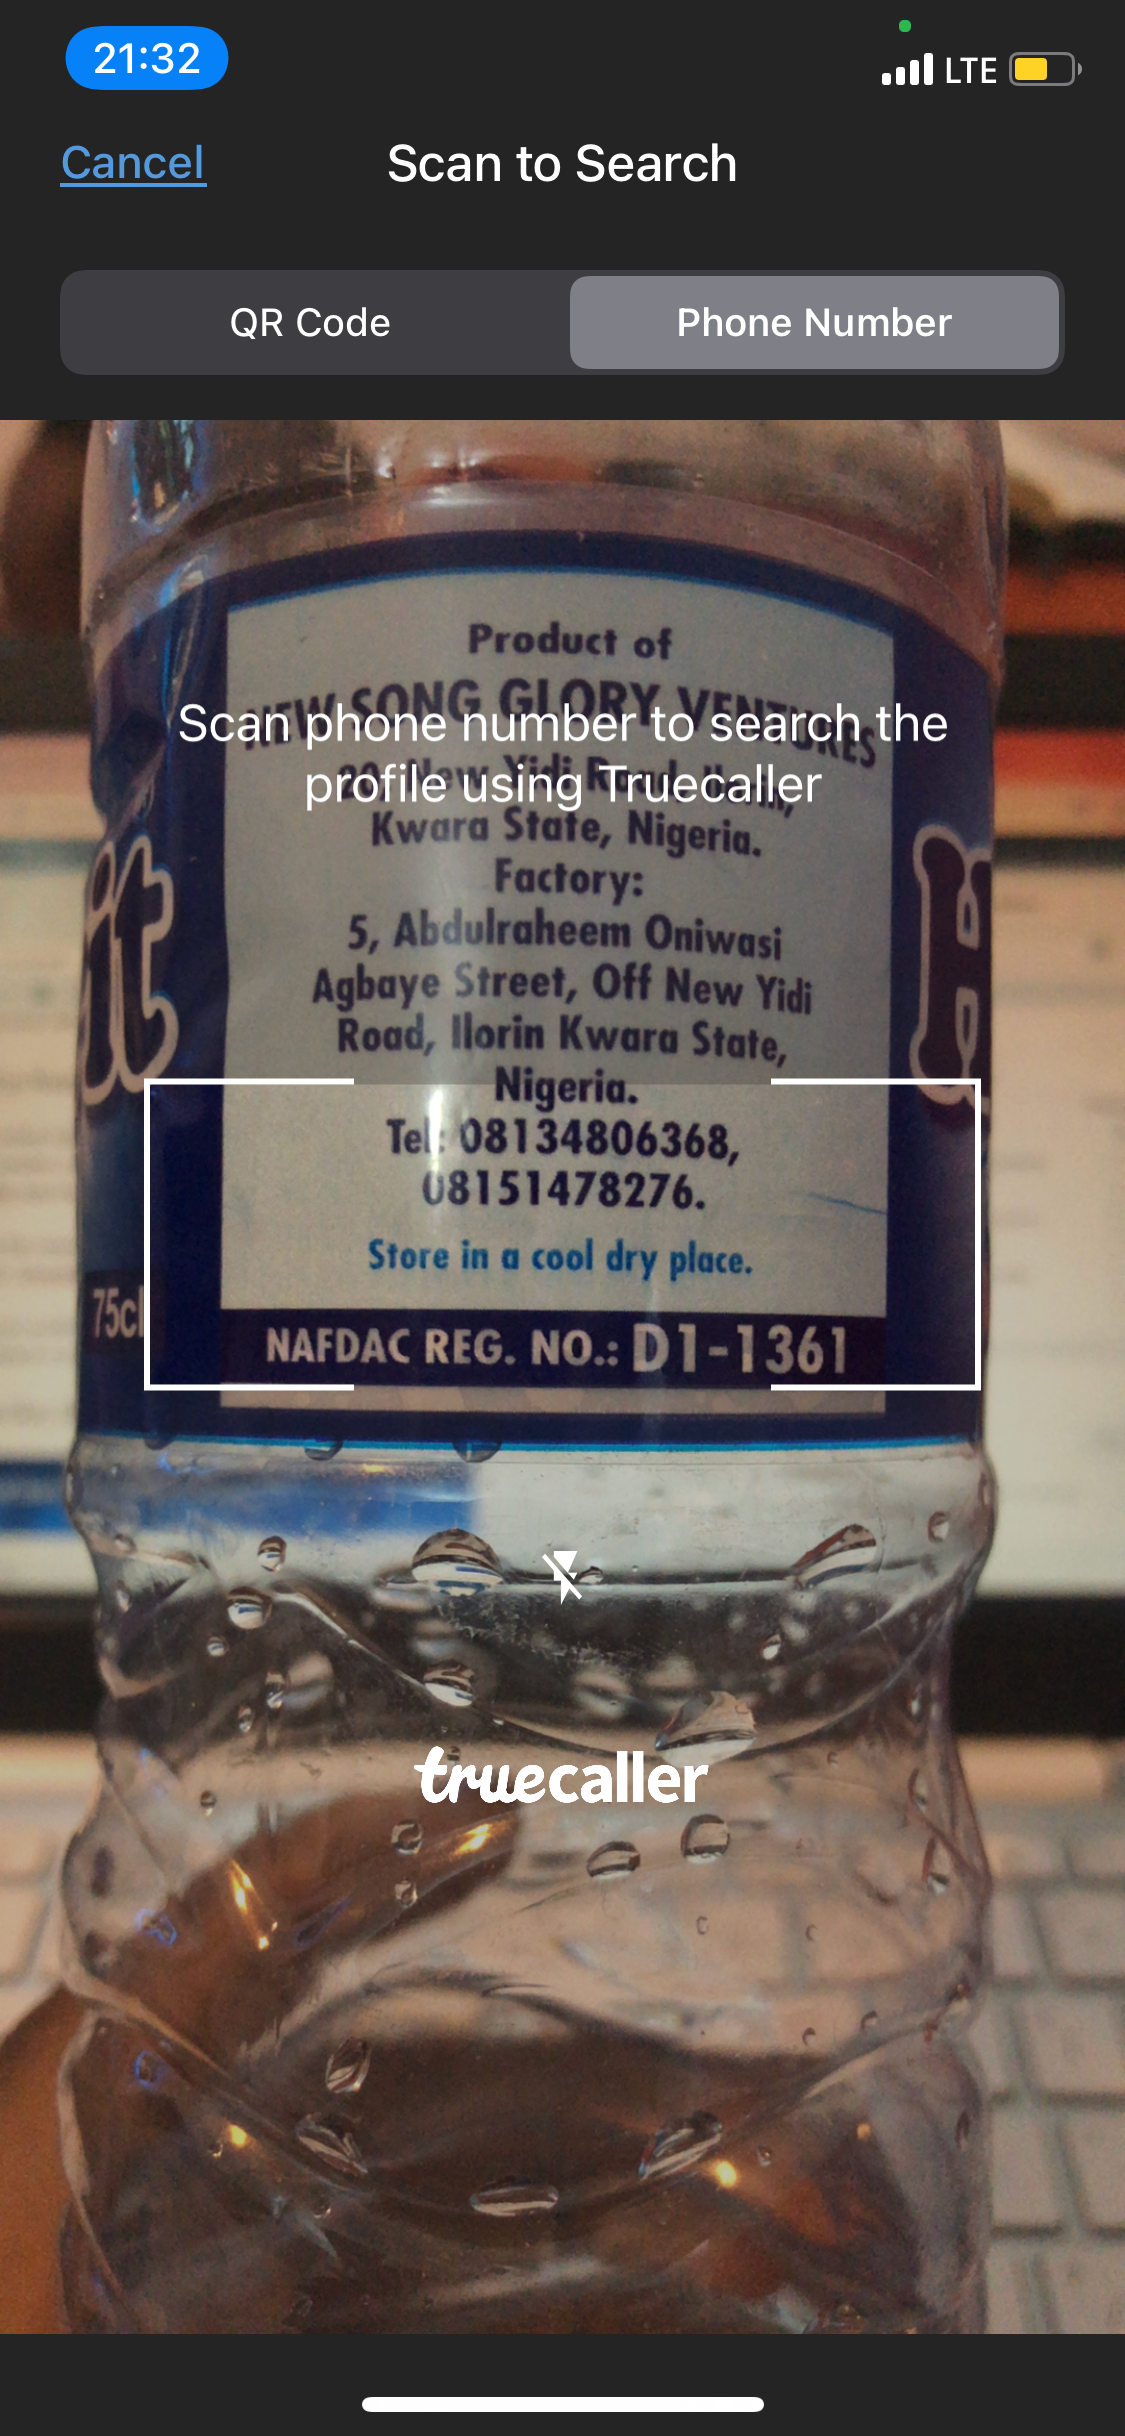 Truecaller Scan feature scanning a phone number on a bottle